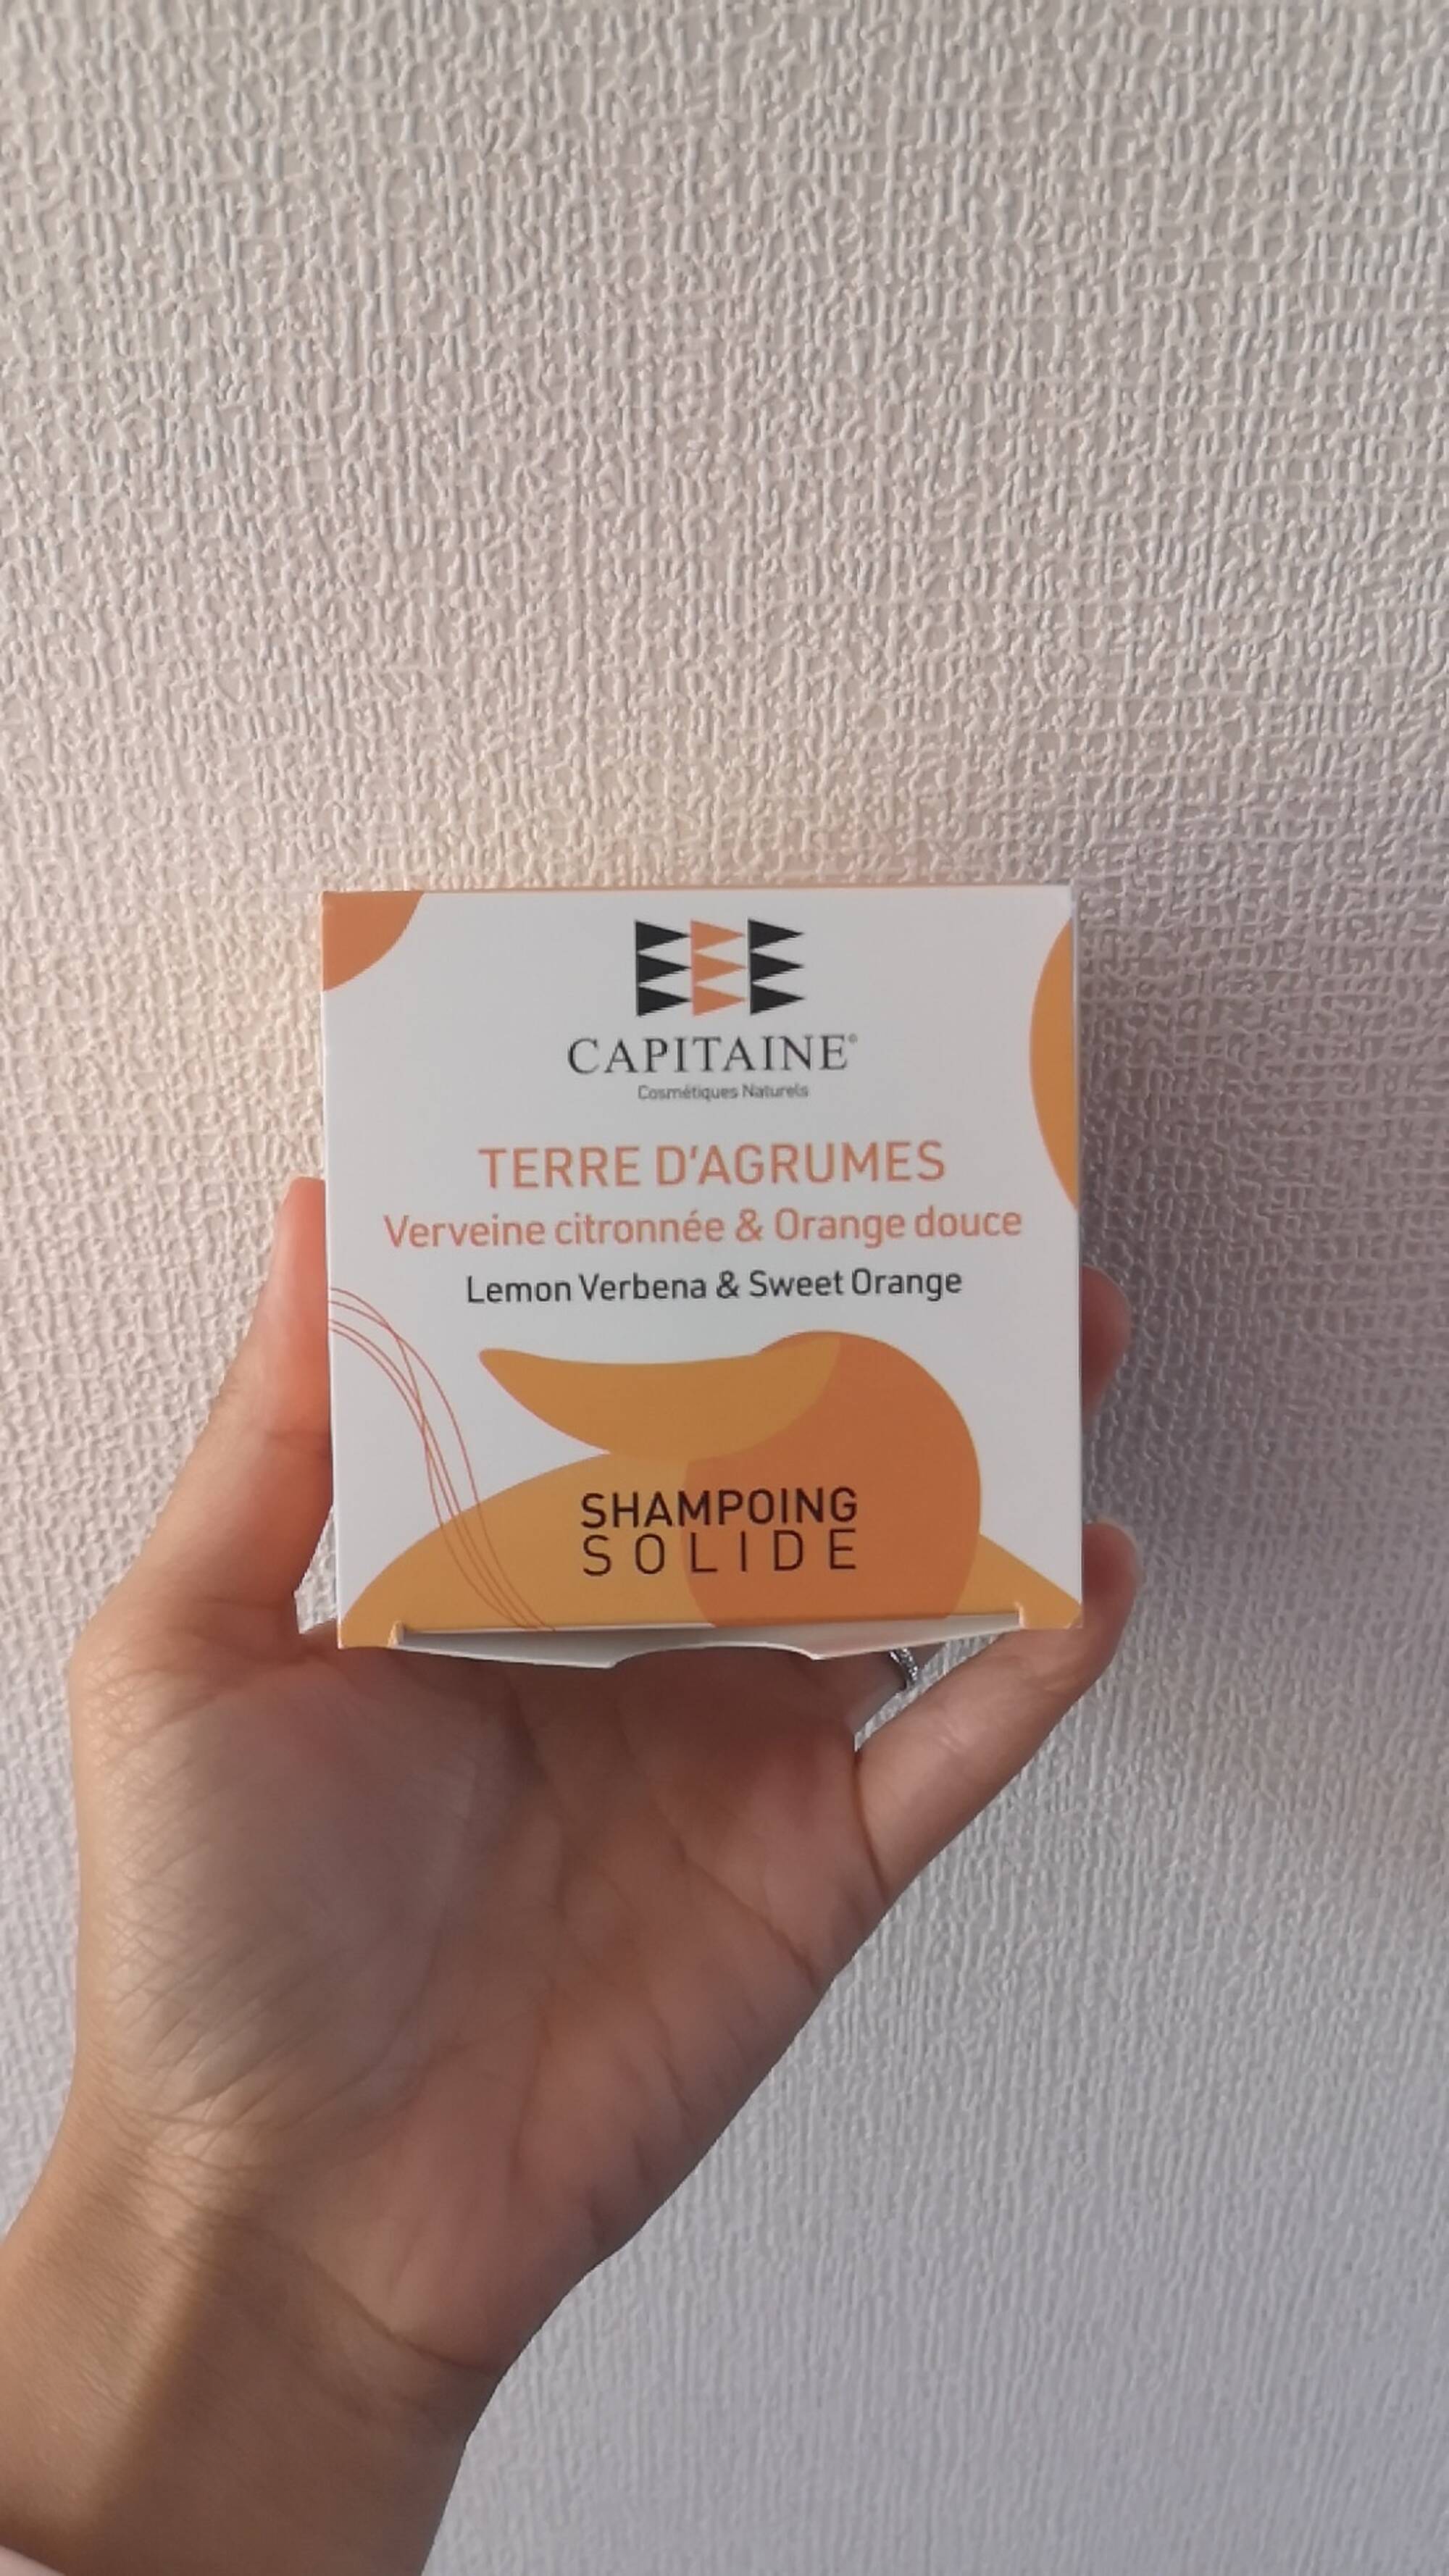 CAPITAINE - Terre d'agrumes - Shampooing solide